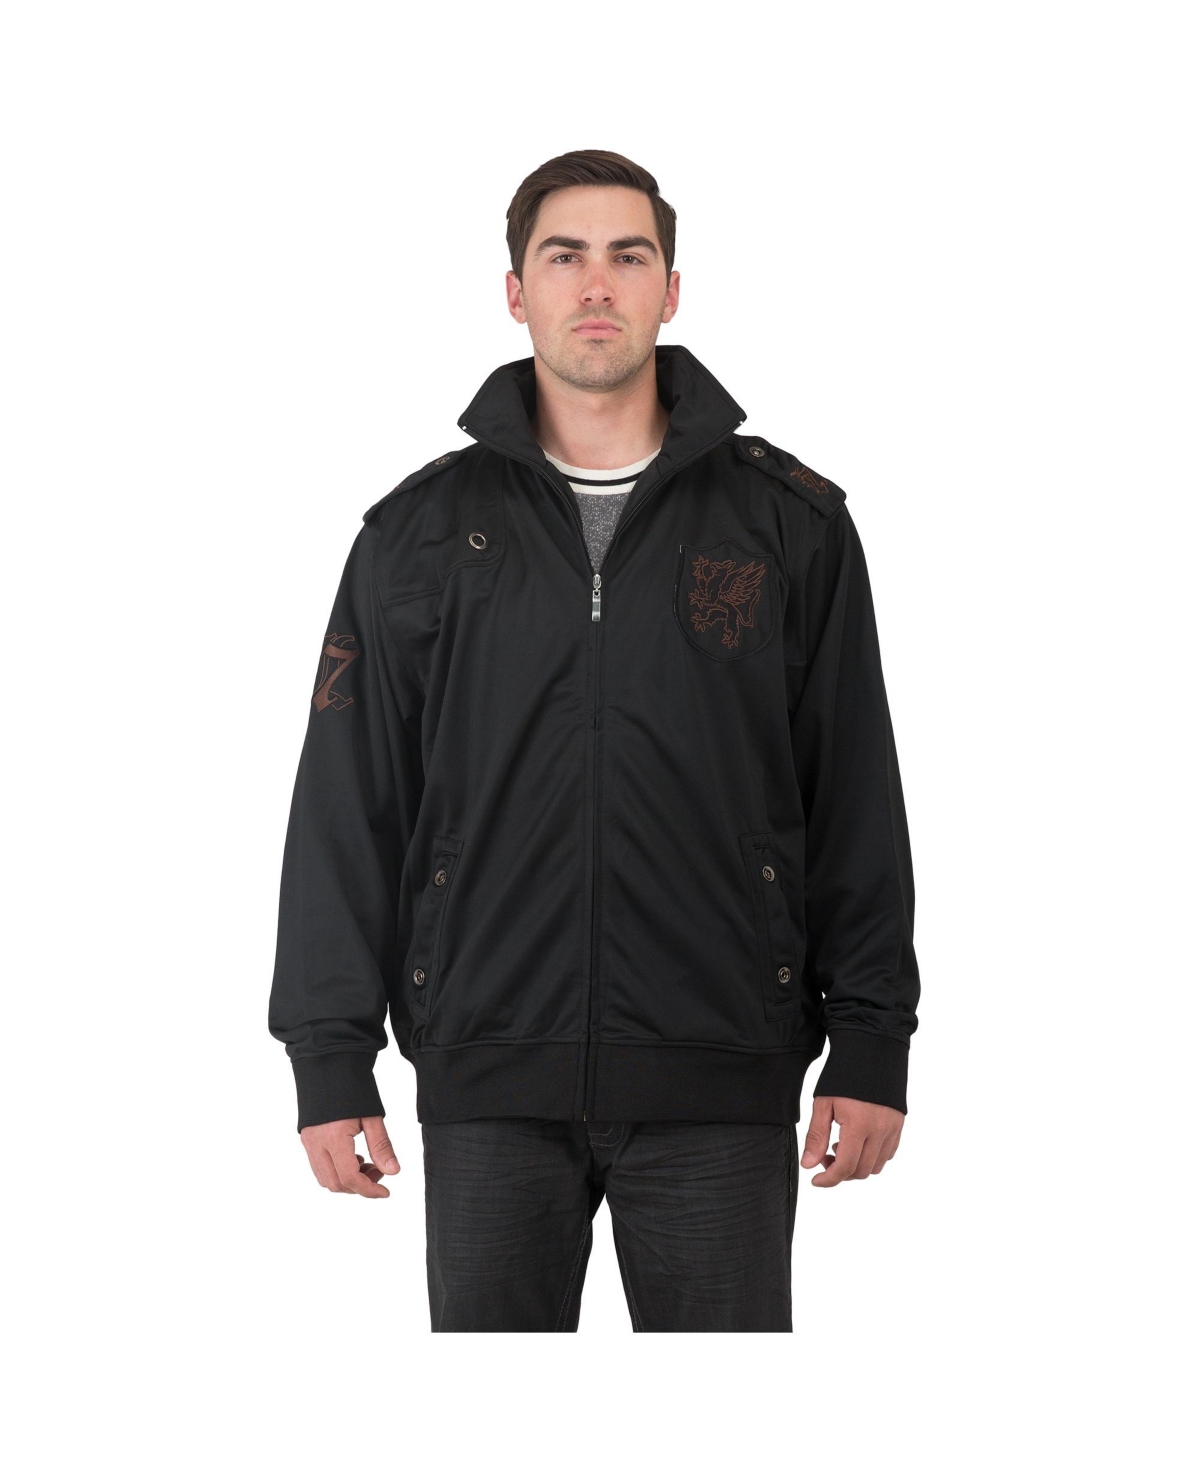 Men's Big & Tall Embroidery Patches Track Jacket - Black